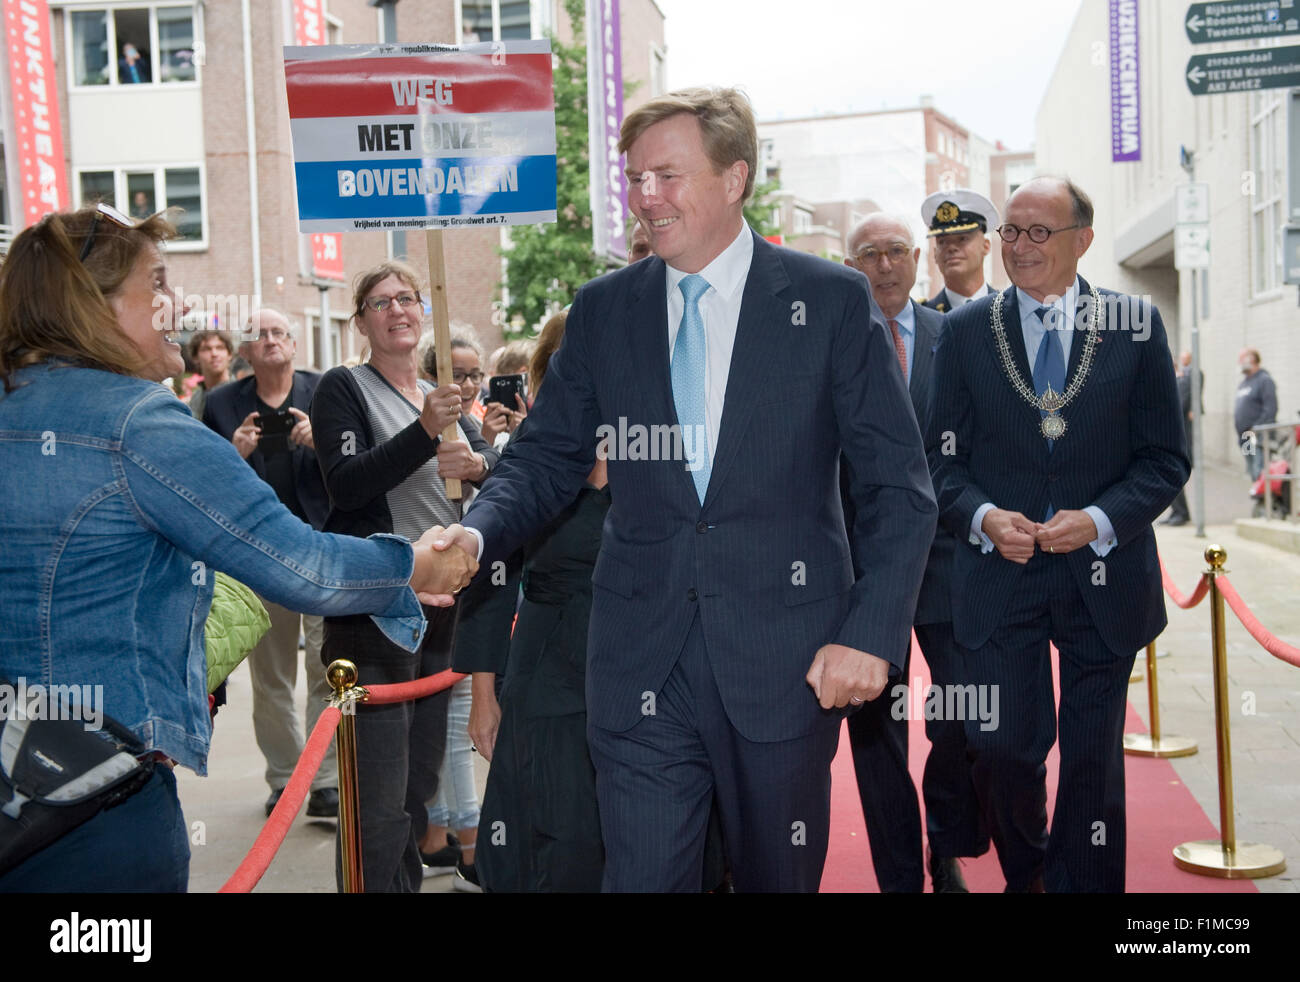 King Willem Alexander from The Netherlands is shaking hands with people while he is going to visit a theater Stock Photo